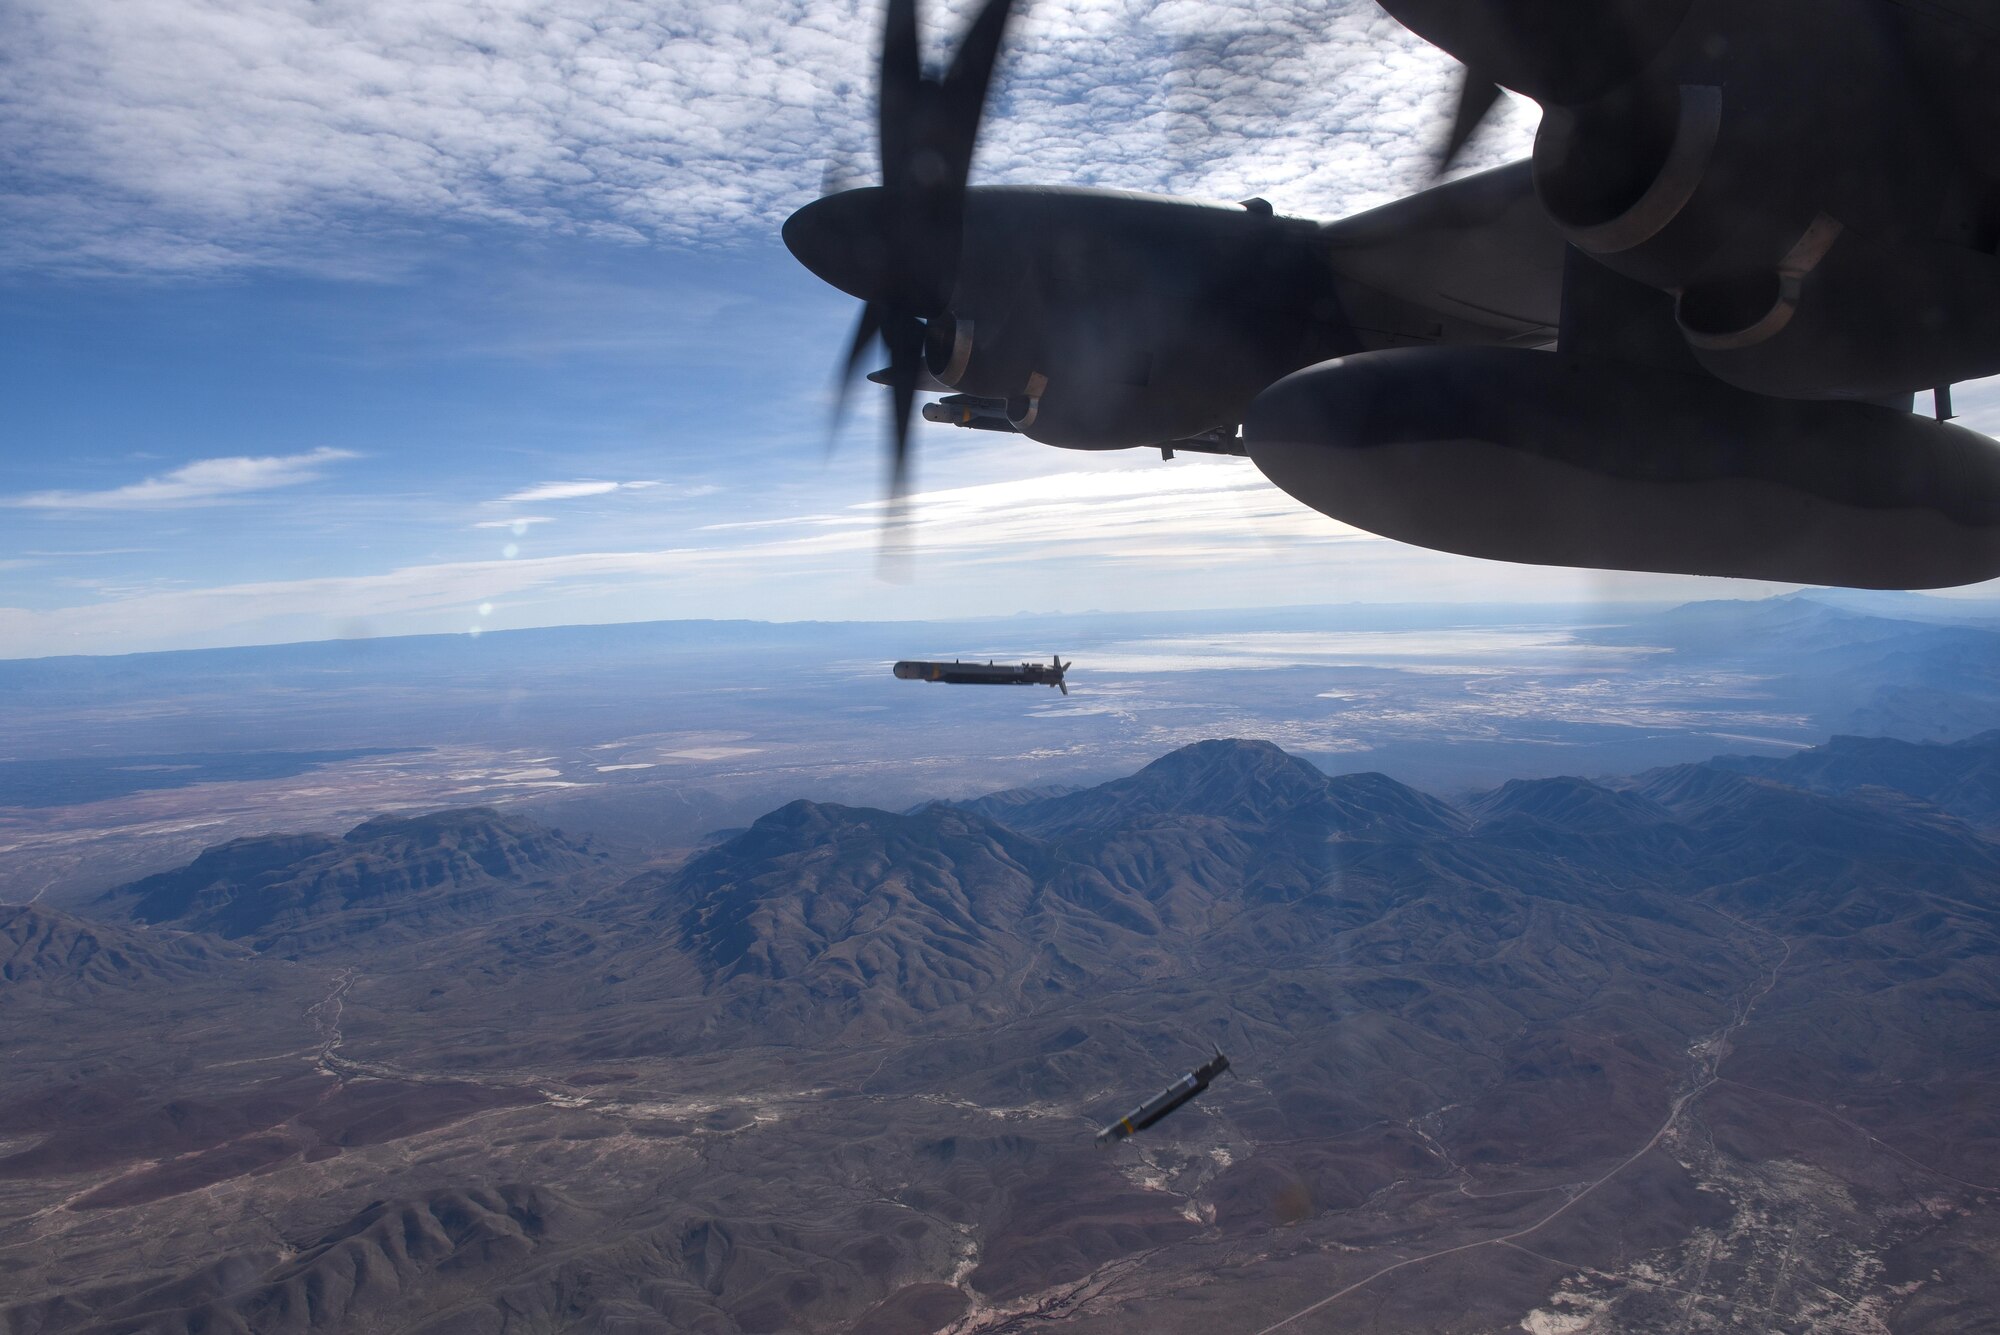 Two, Laser Guided Small Diameter Bombs are released from the wing of an AC-130J Ghostrider over White Sands Missile Range, N.M., Dec. 13, 2016. The AC-130J is outfitted with multiple weapons systems to include a 30mm and 105mm cannon, GBU-39 Small Diameter Bombs and AGM-176 Griffin missiles. (U.S. Air Force photo by Senior Airman Jeff Parkinson)